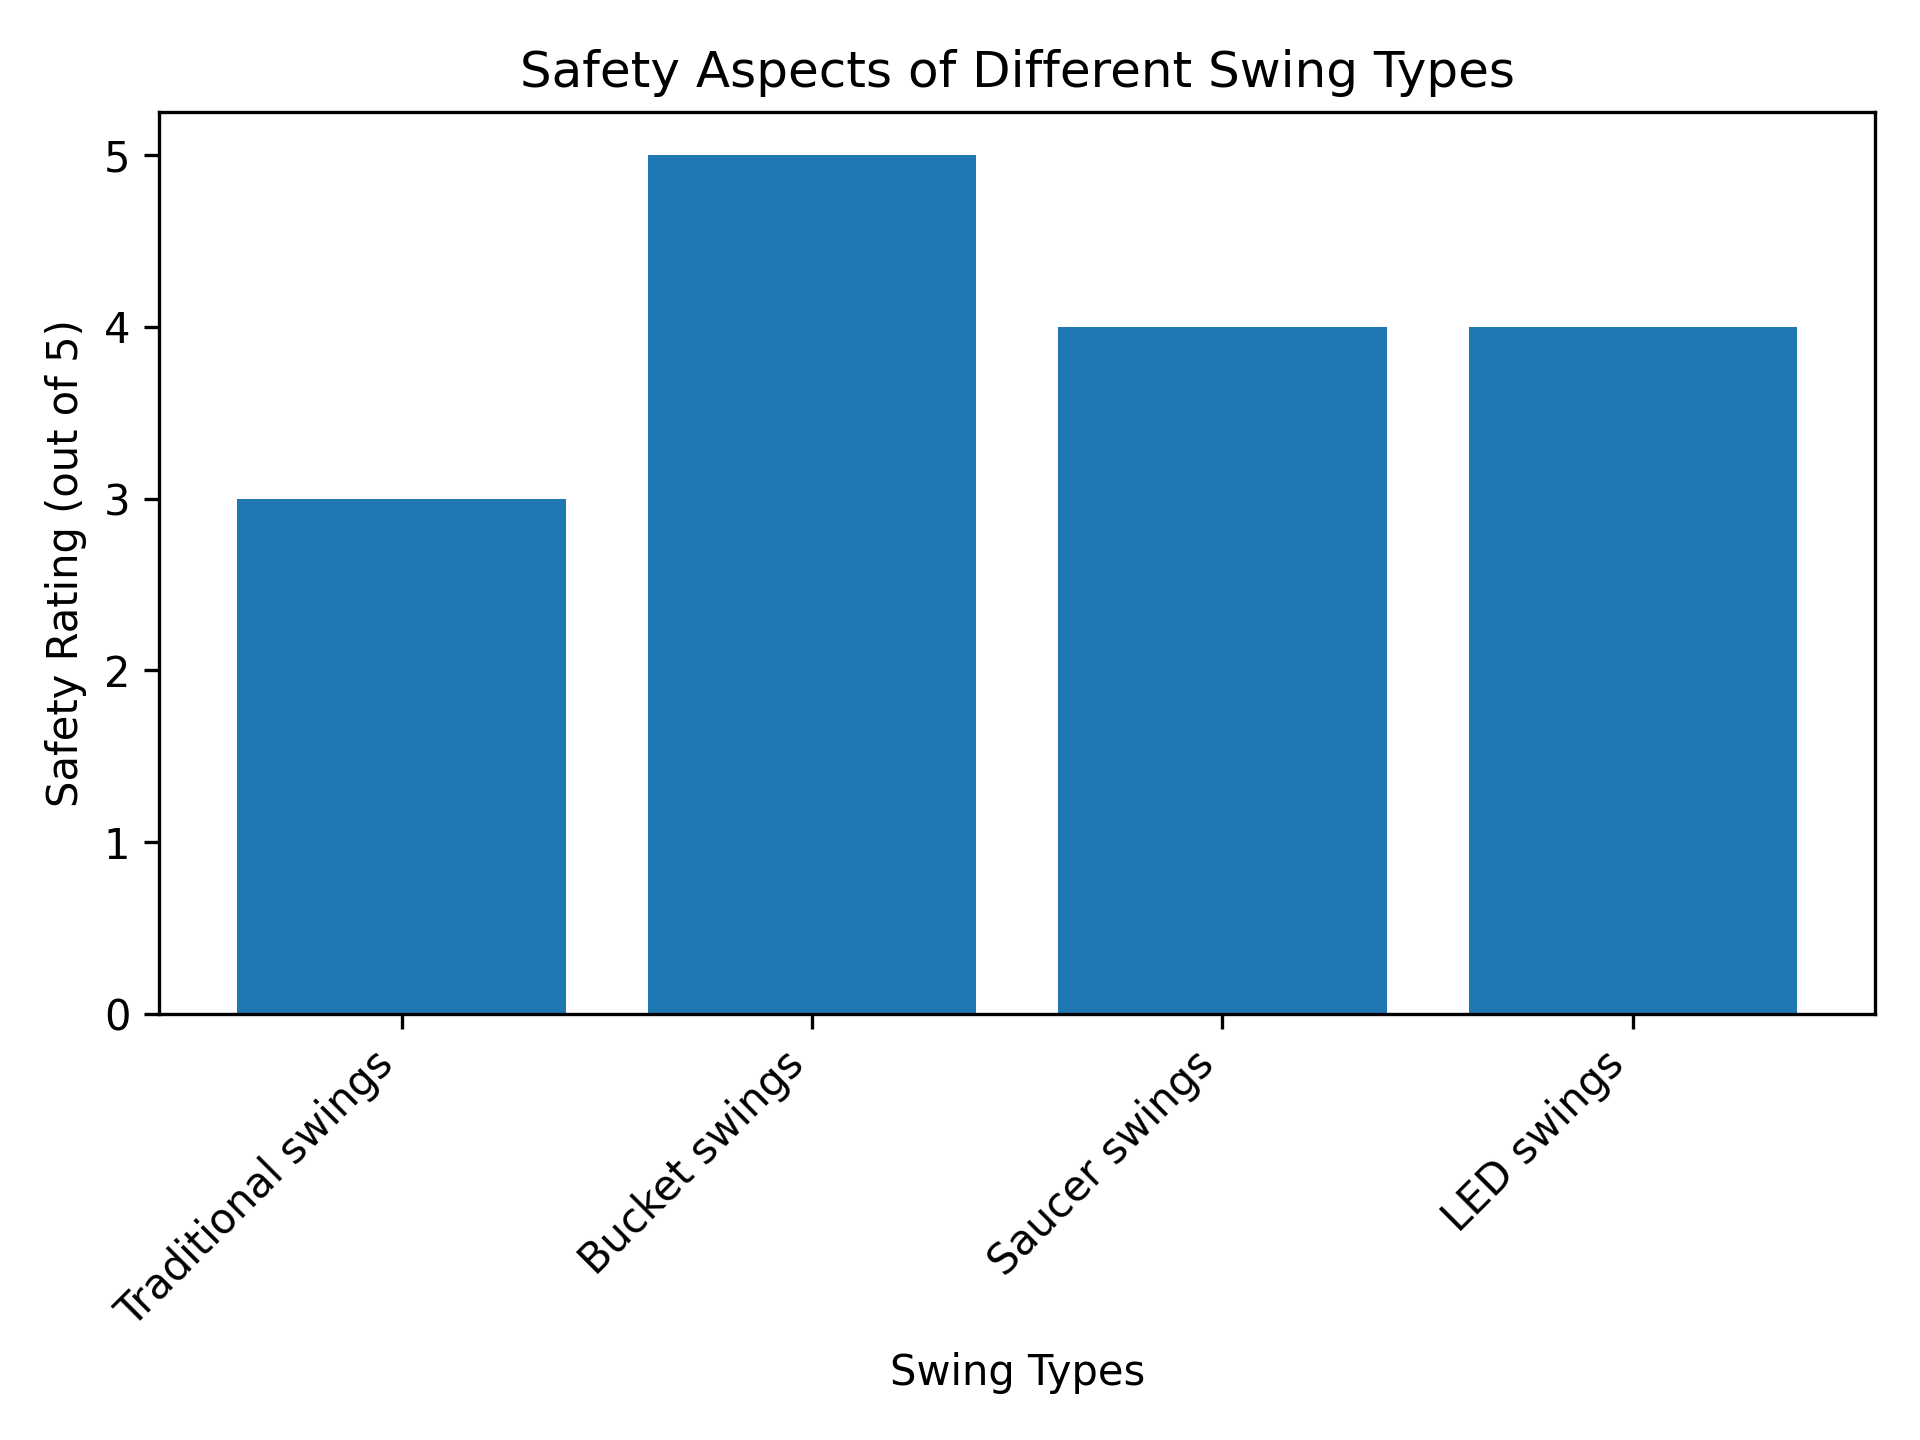 Safety Aspects of Different Swing Types